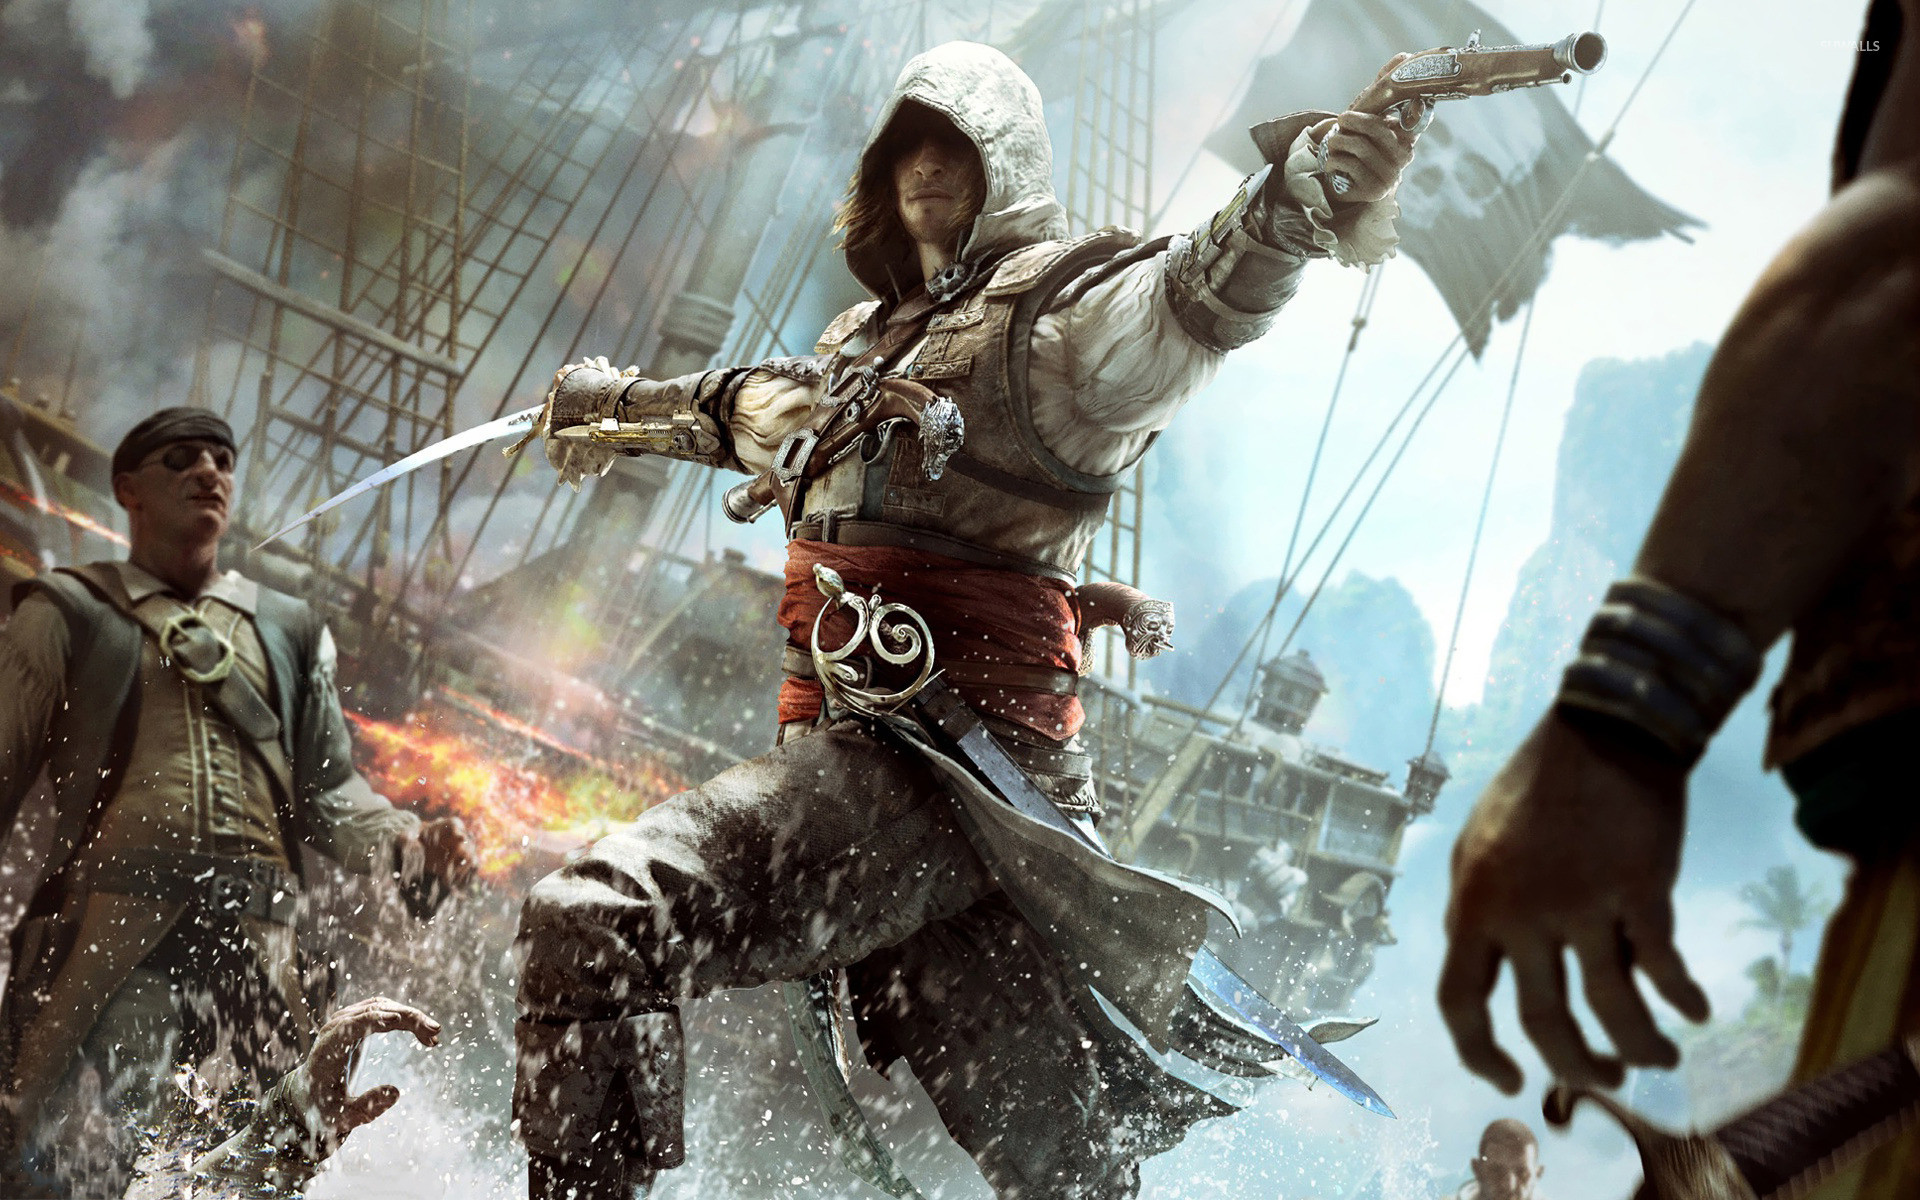 assassin's creed wallpaper download,action adventure game,pc game,movie,games,action film